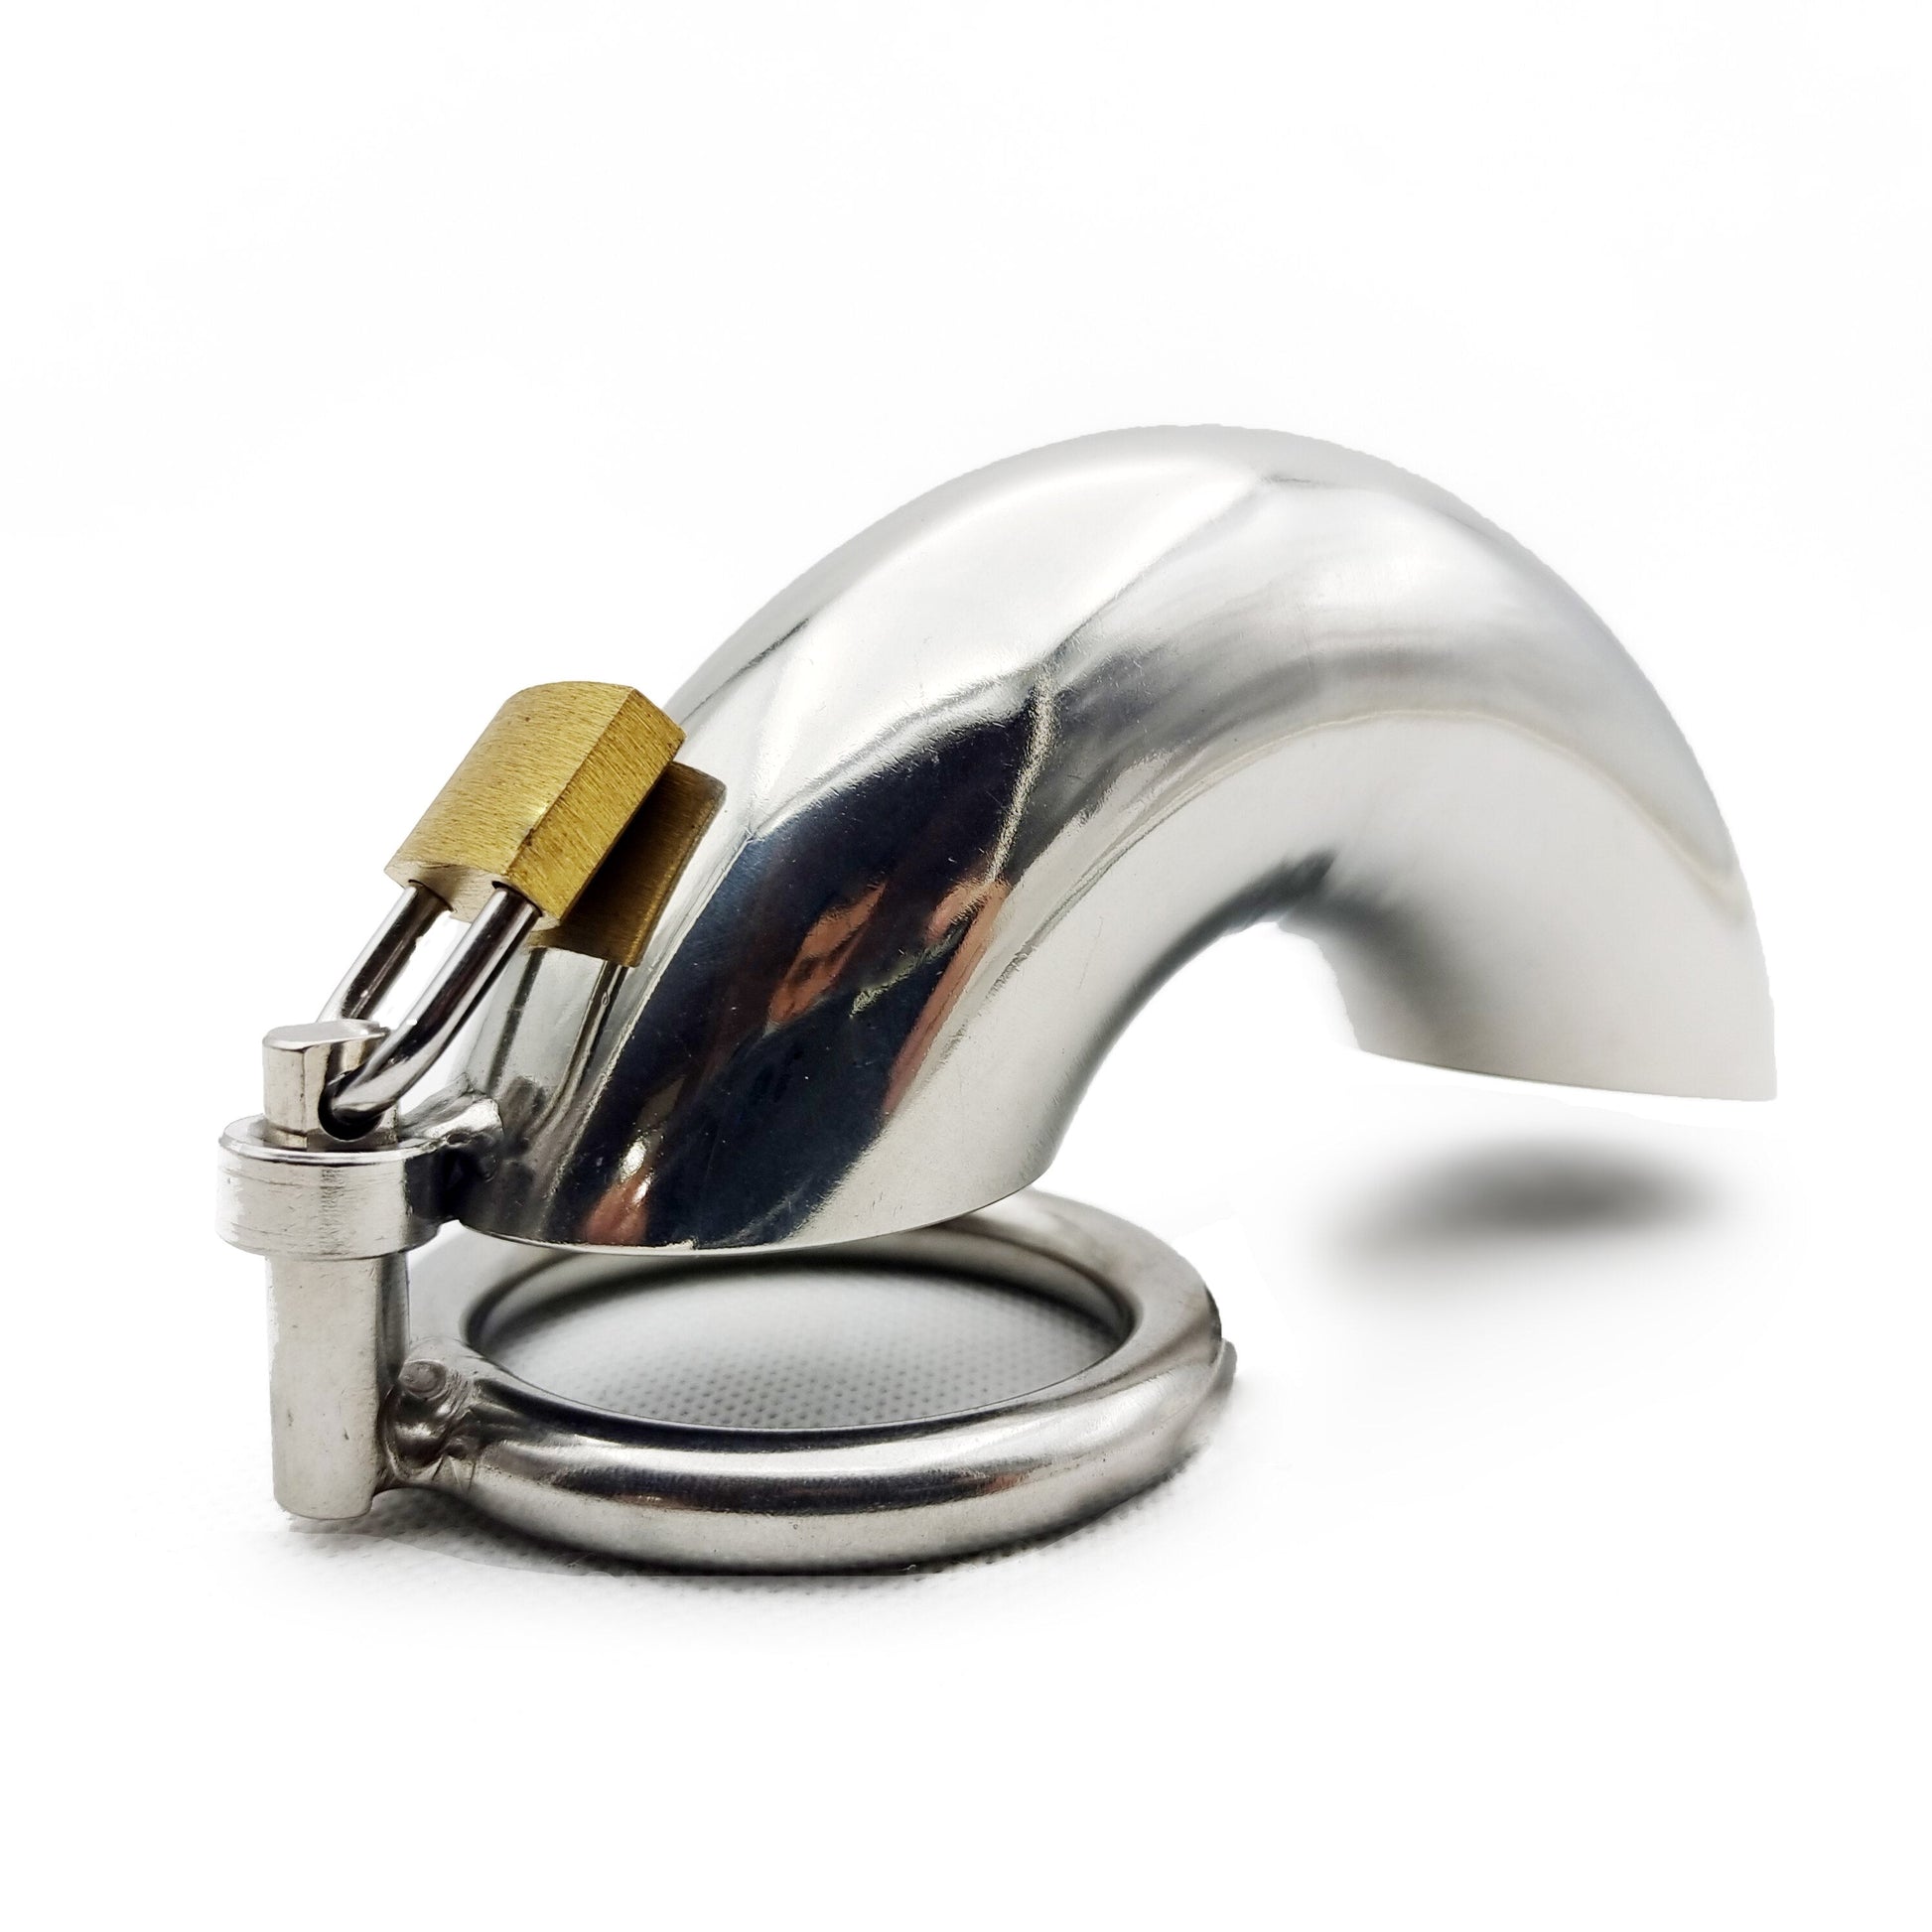 Men's Stainless Steel Chastity Device: Lockable Full Closed Cock Cage Belt with Penis Rings Sleeve for Adult BDSM Play - KeepMeLocked